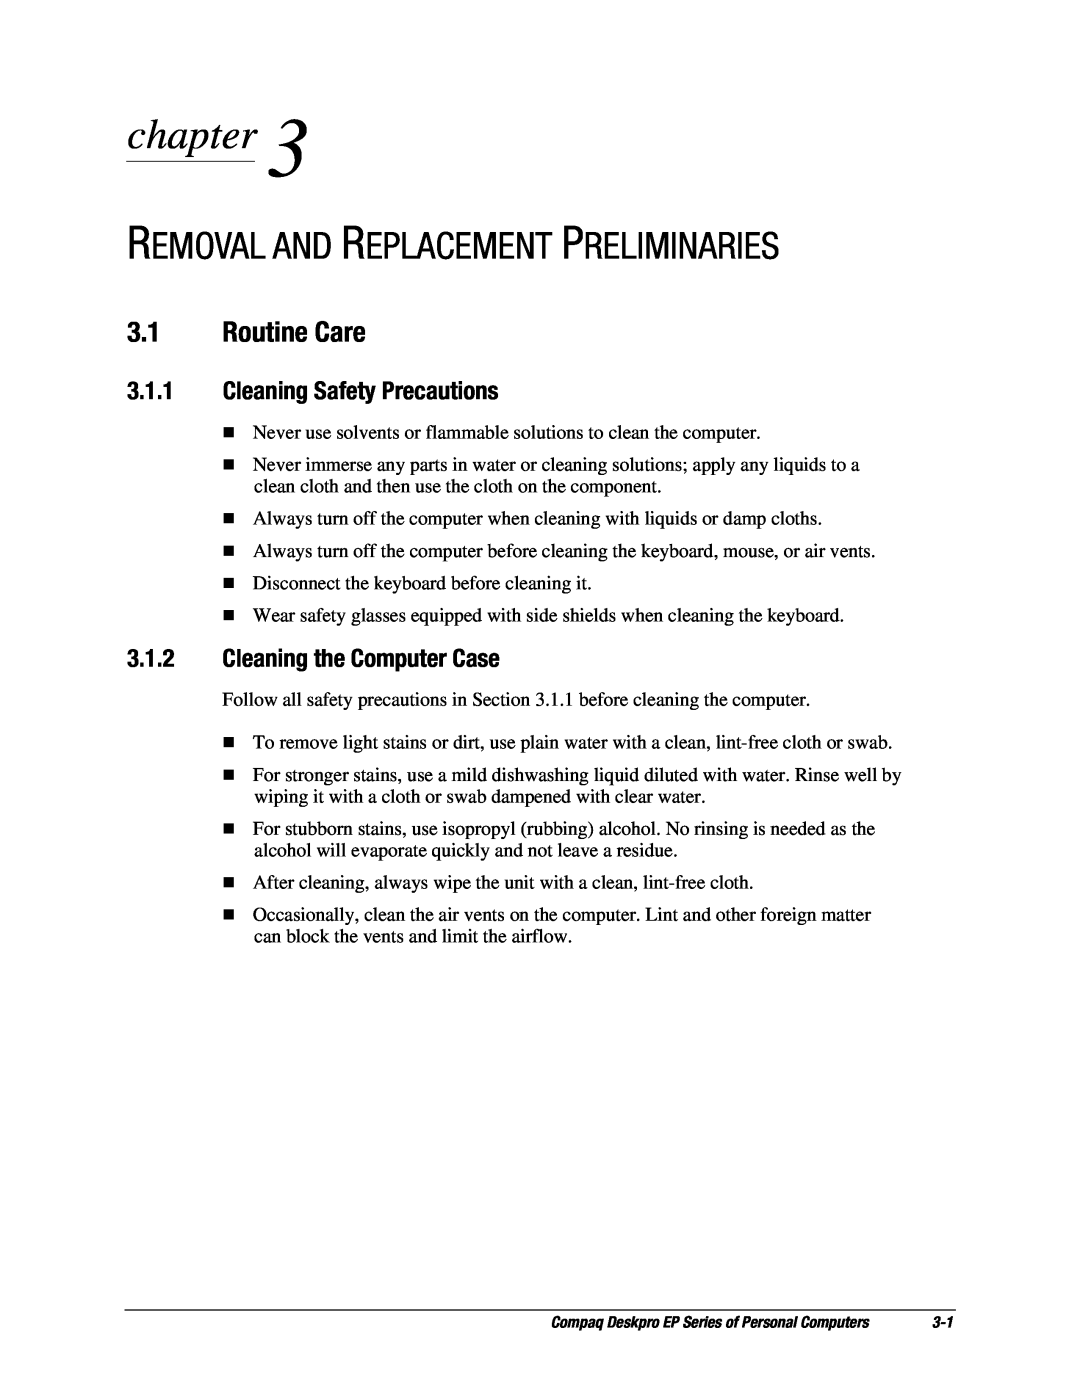 Compaq EP Series manual Removal And Replacement Preliminaries, Routine Care, Cleaning Safety Precautions, chapter 